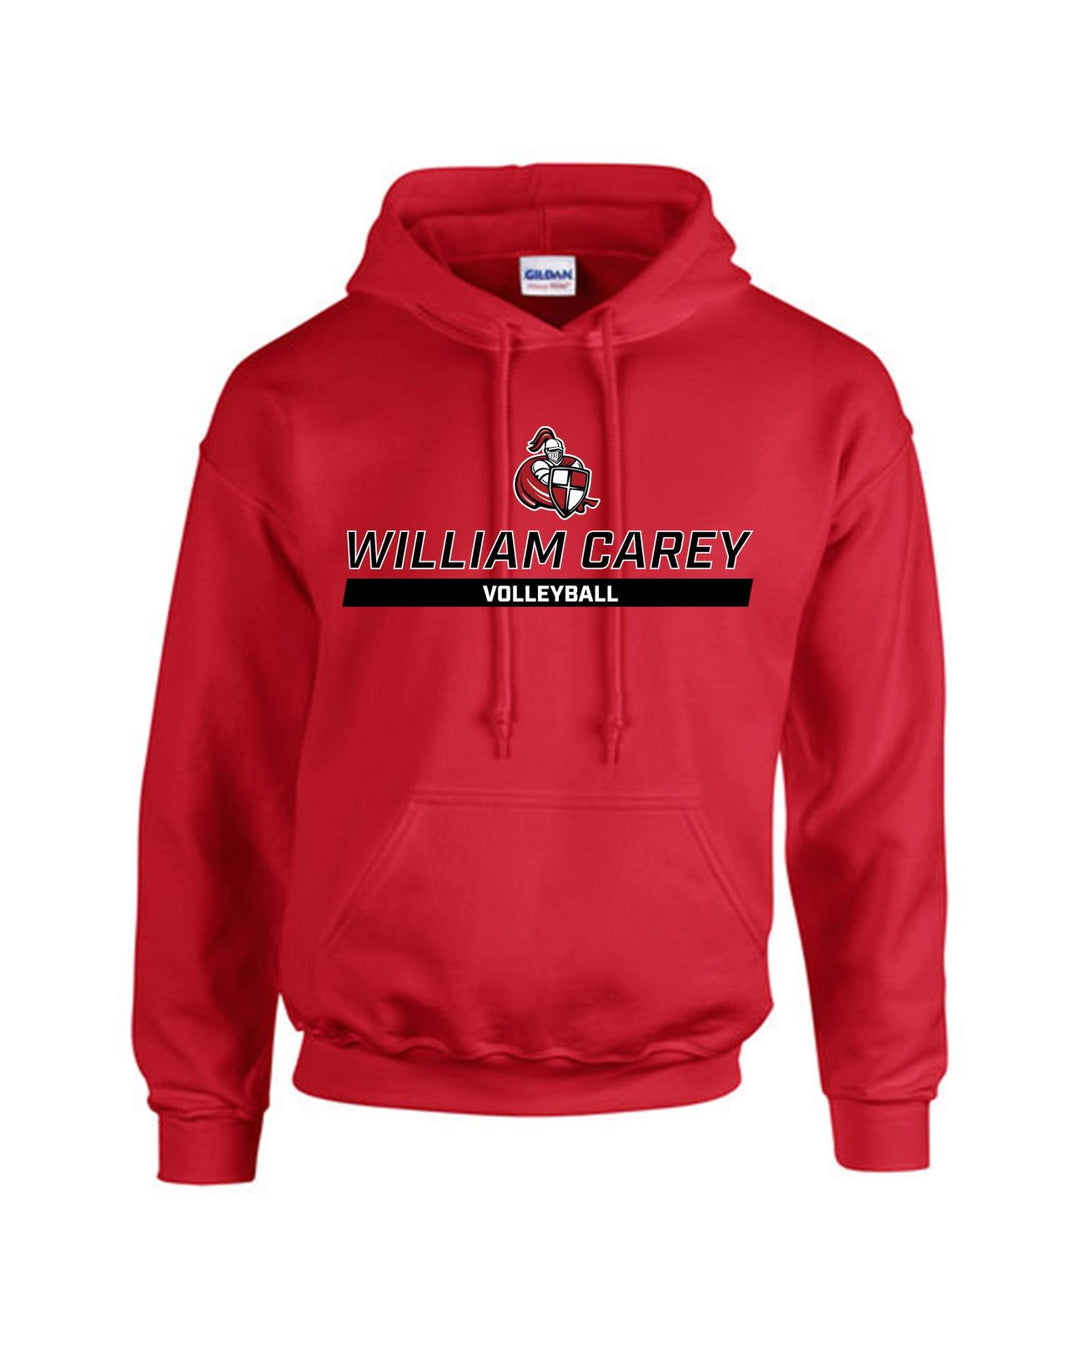 Carey Volleyball Youth Hoody WCU Volleyball Red WC W/Crusader - Third Coast Soccer